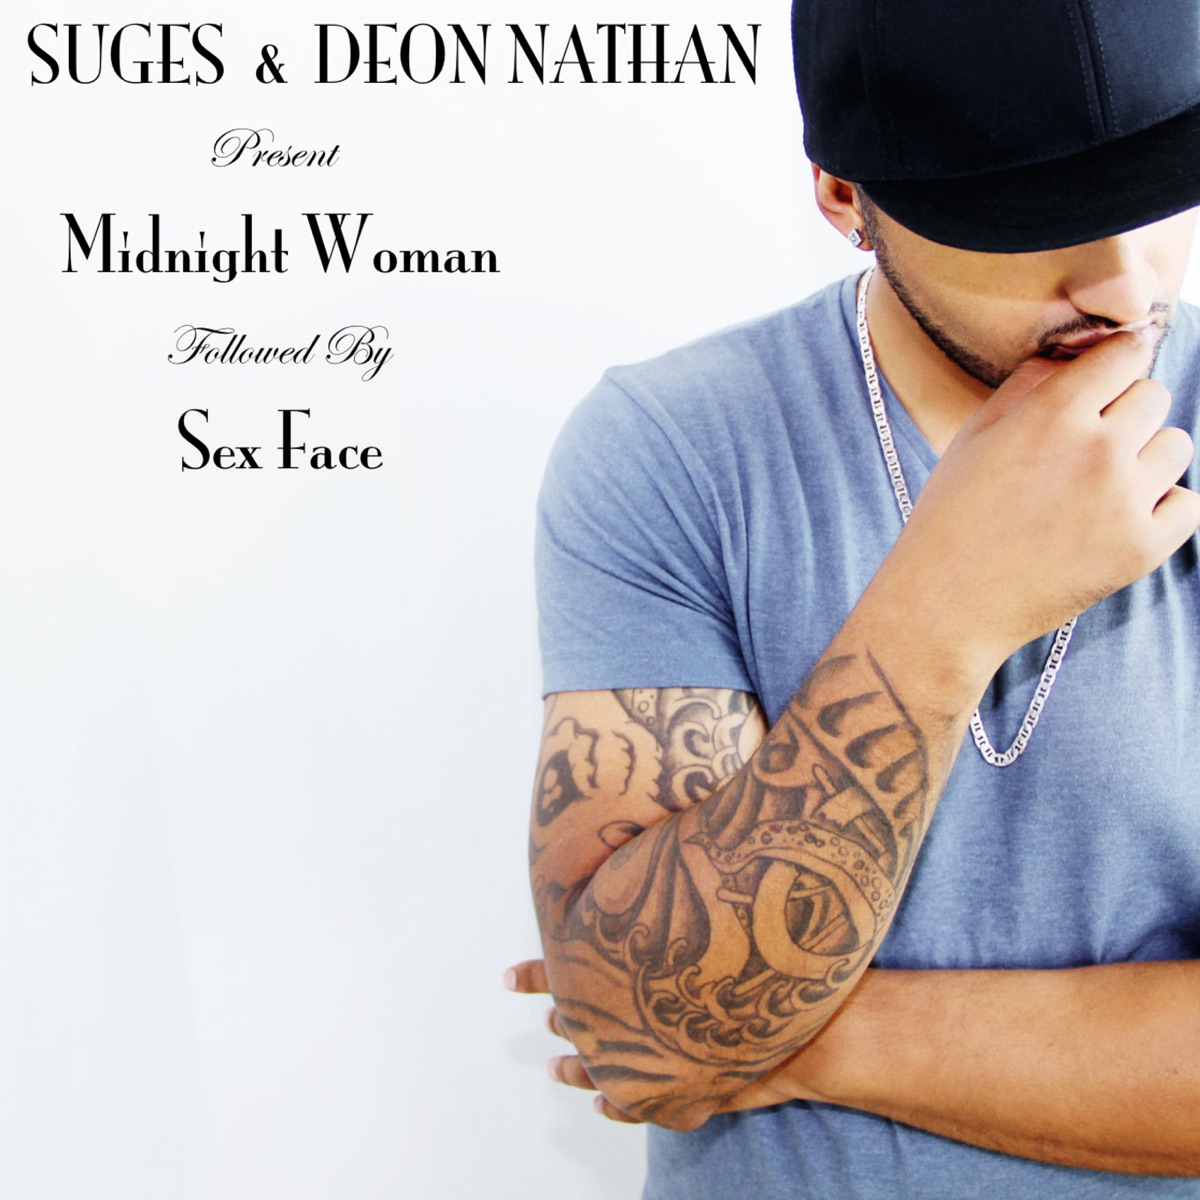 Midnight Woman / Sex Face - Album by Suges and Deon Nathan pic